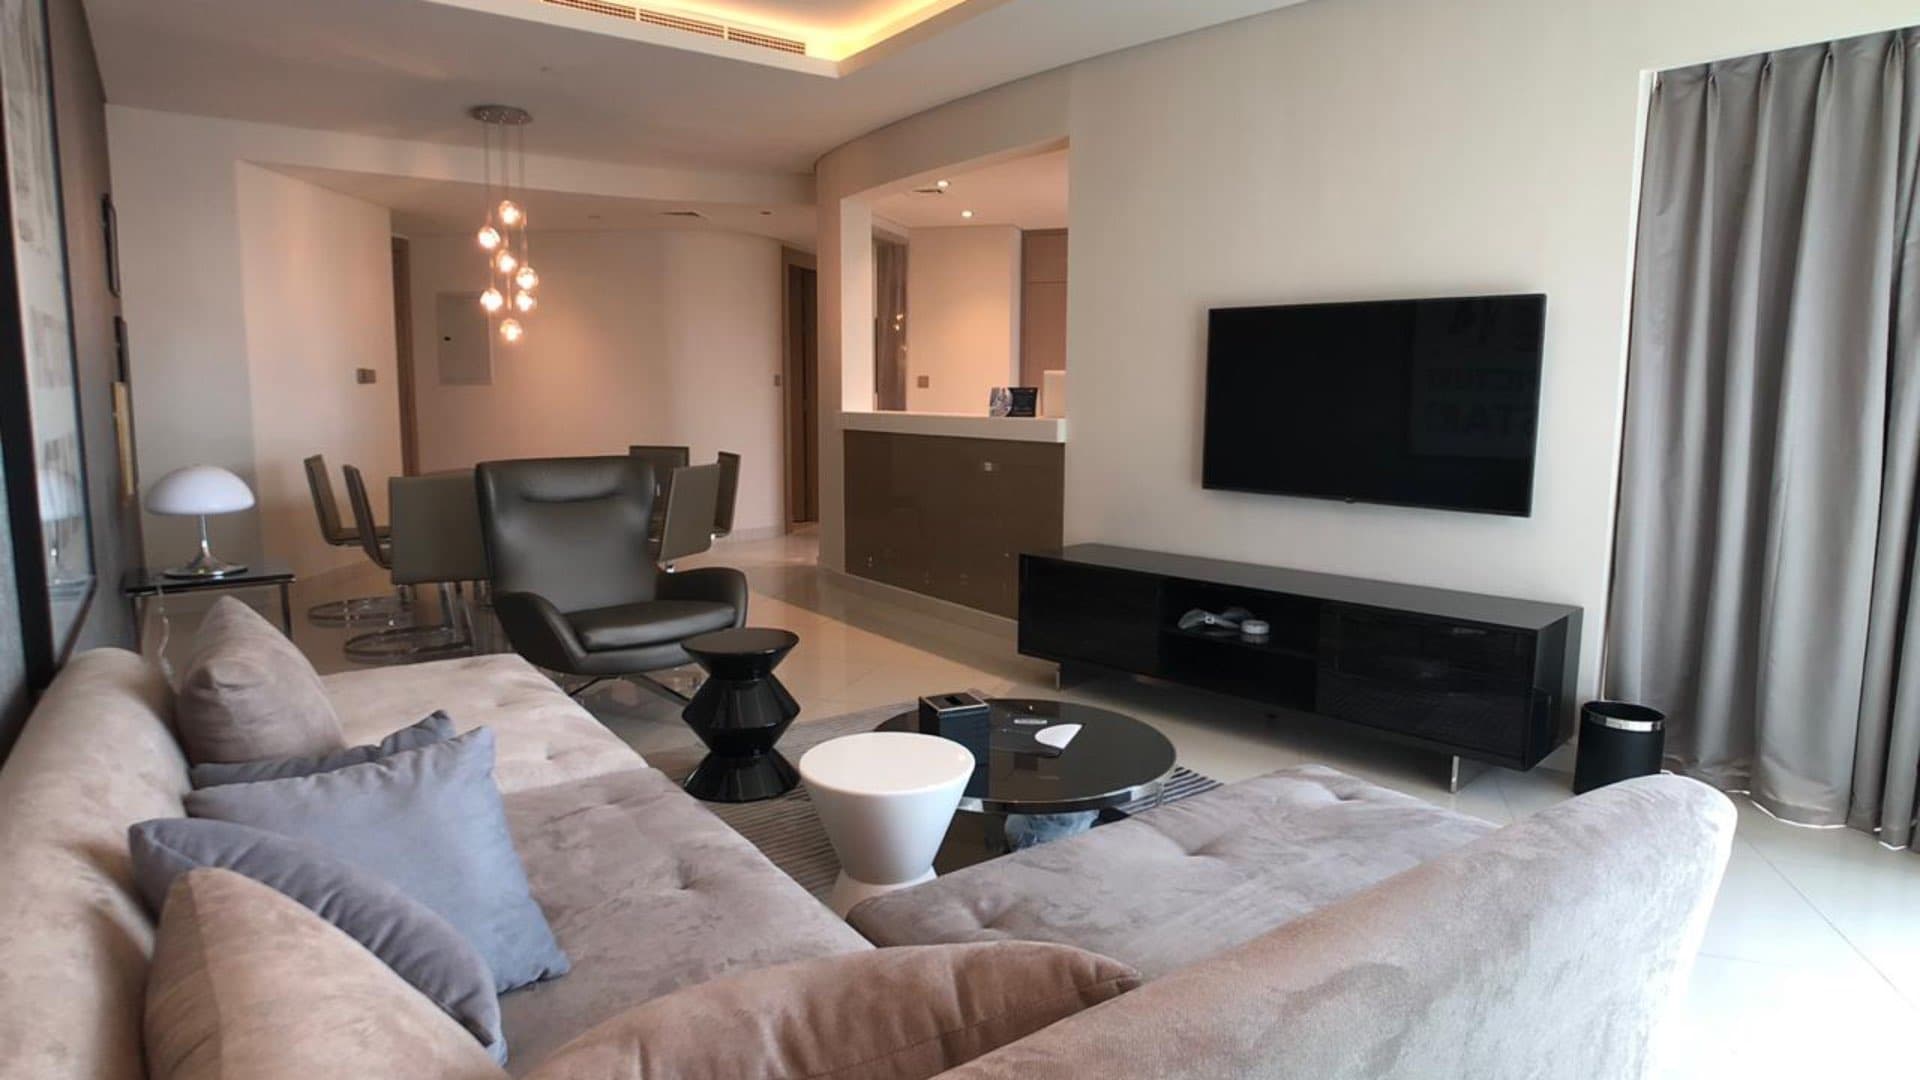 2 Bedroom Apartment For Sale Damac Towers By Paramount Lp09996 1a5f103ff6b60100.jpeg